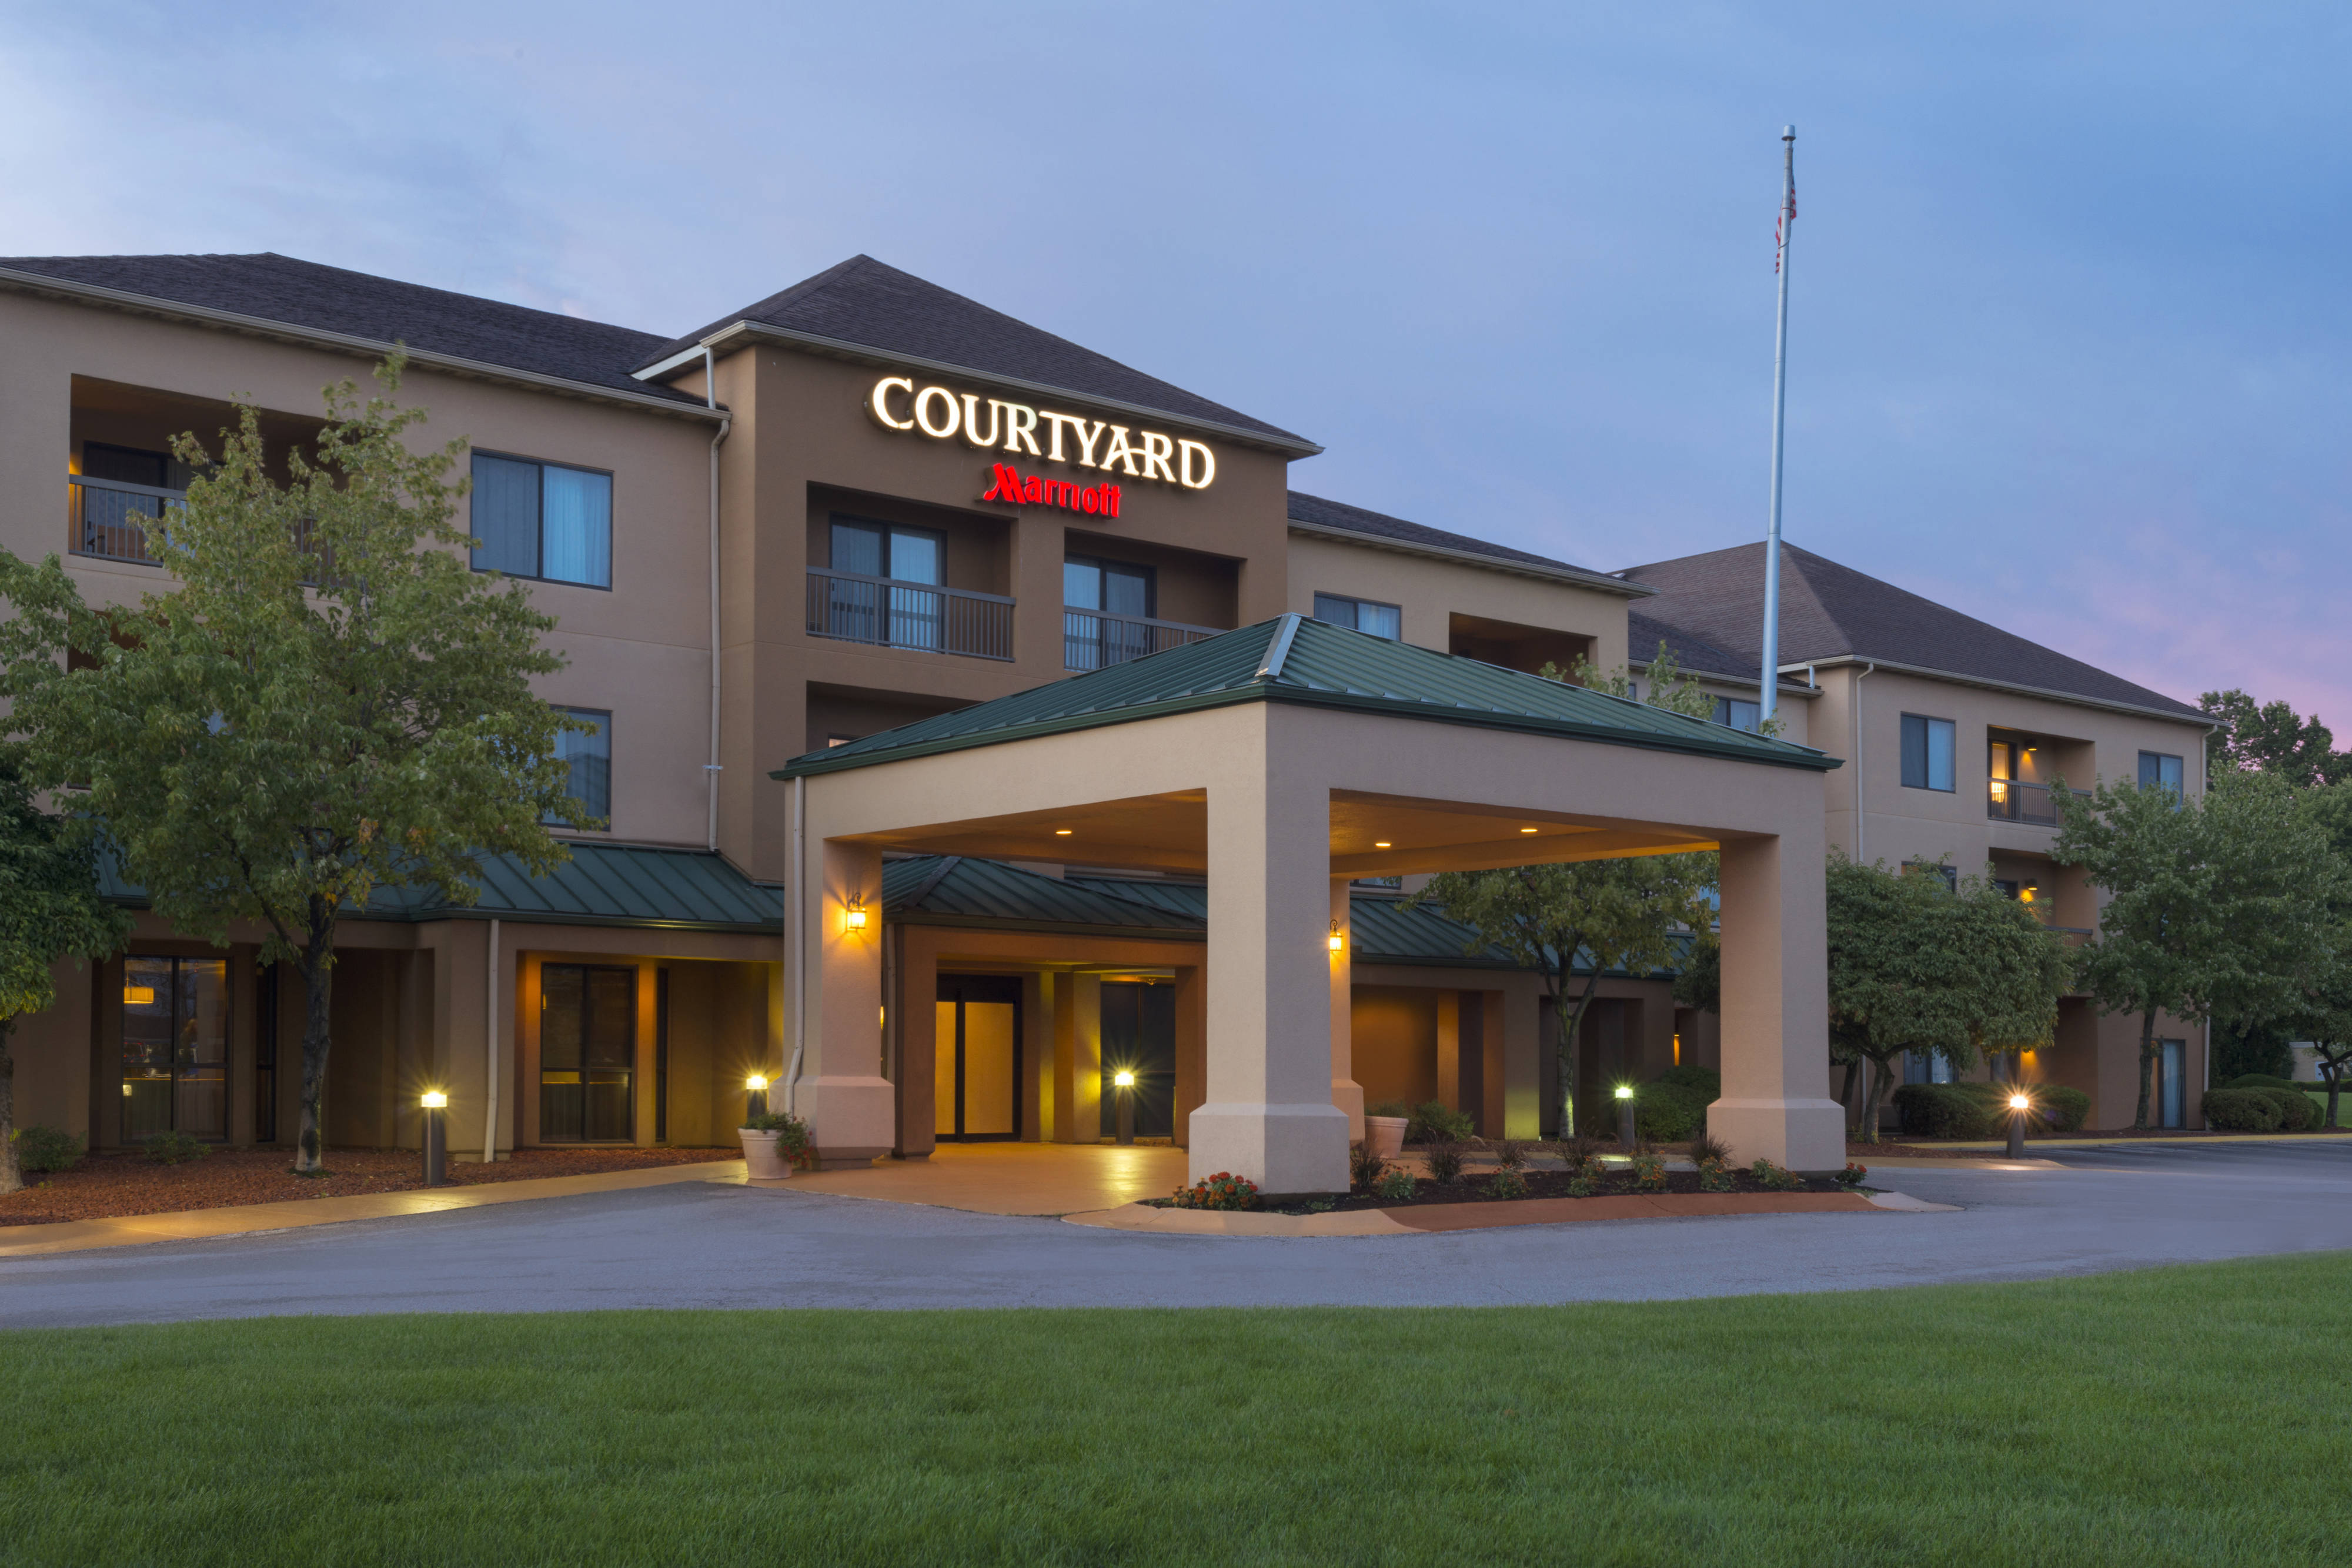 Photo of Courtyard by Marriott Akron Fairlawn, Akron, OH